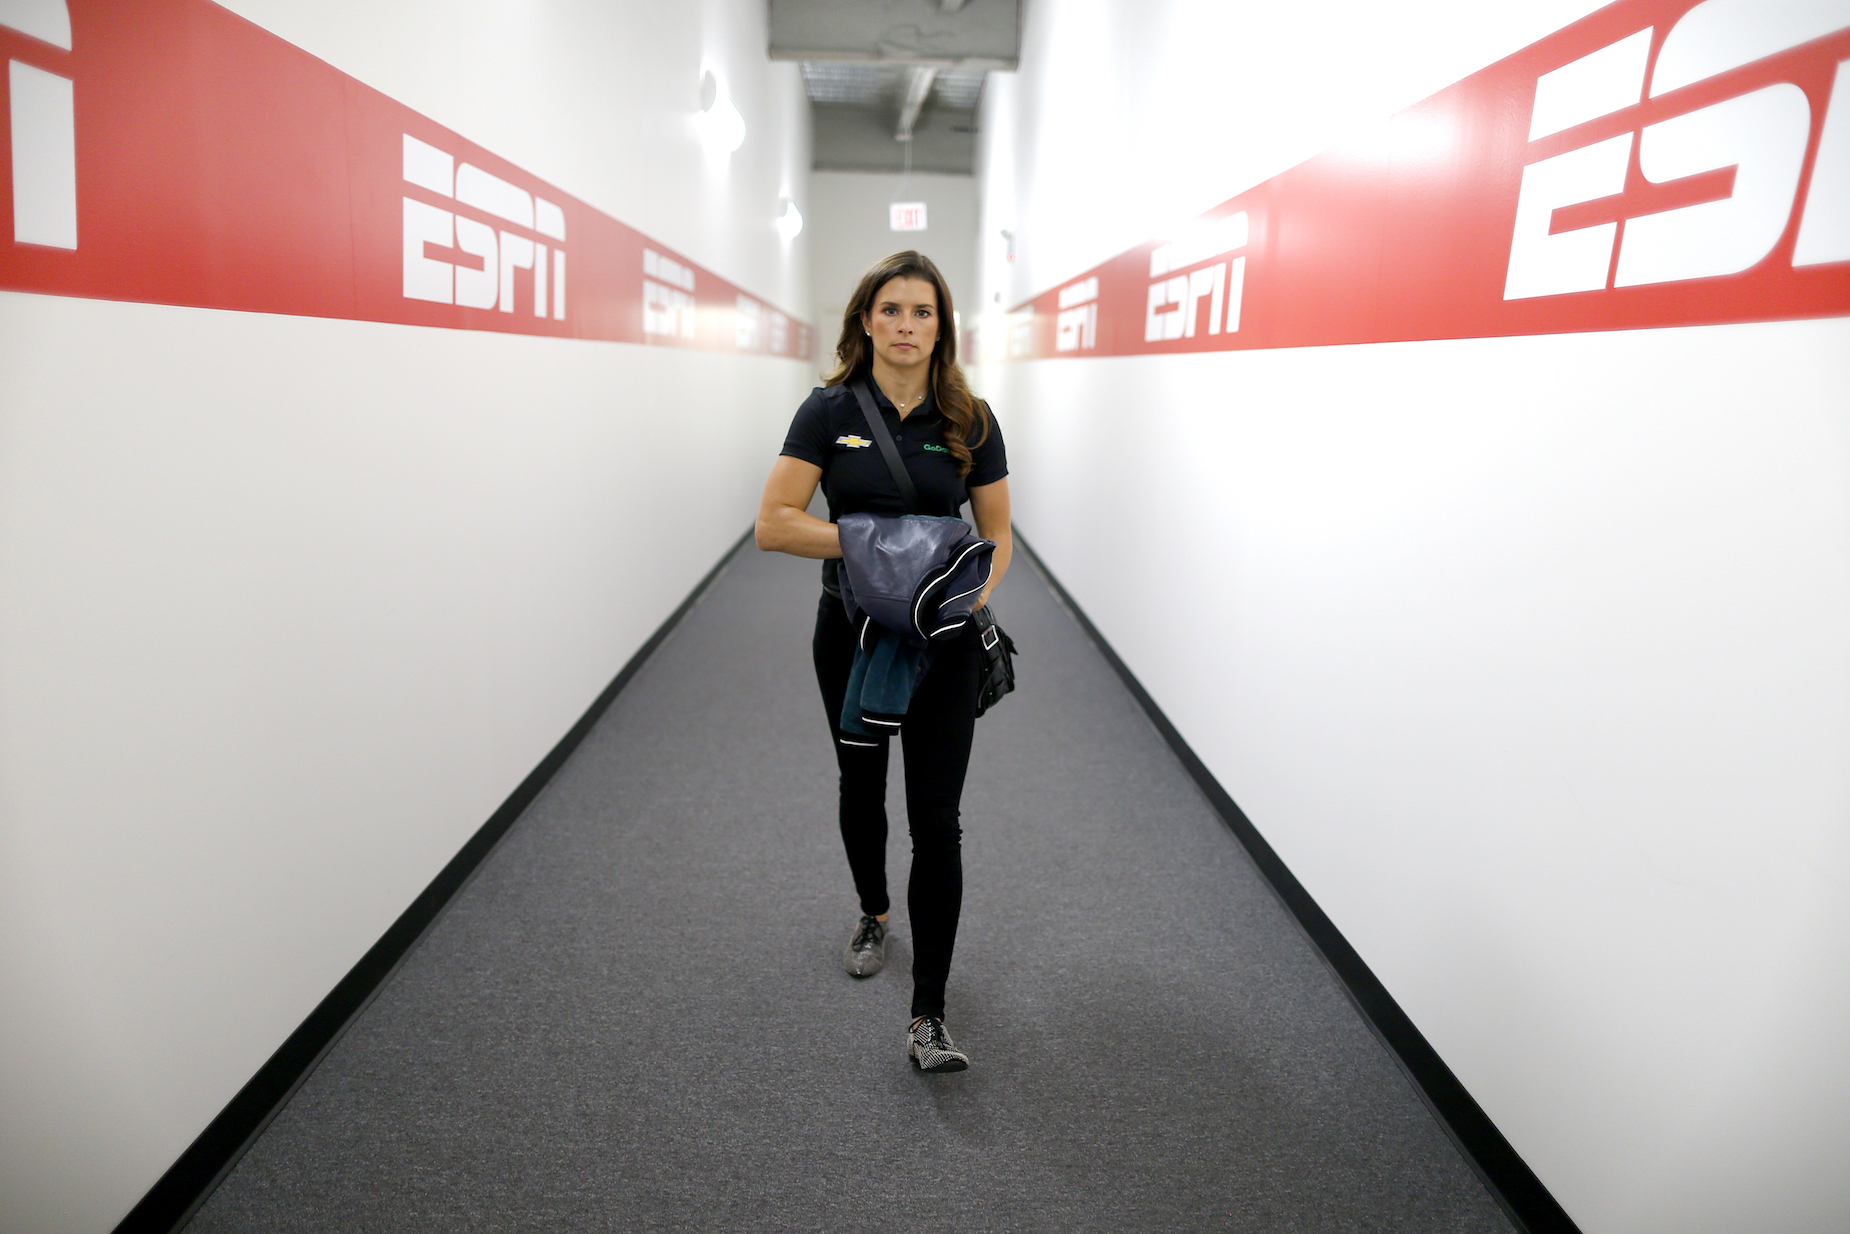 While Danica Patrick spent almost three decades behind the wheel, she doesn't miss racing in retirement.